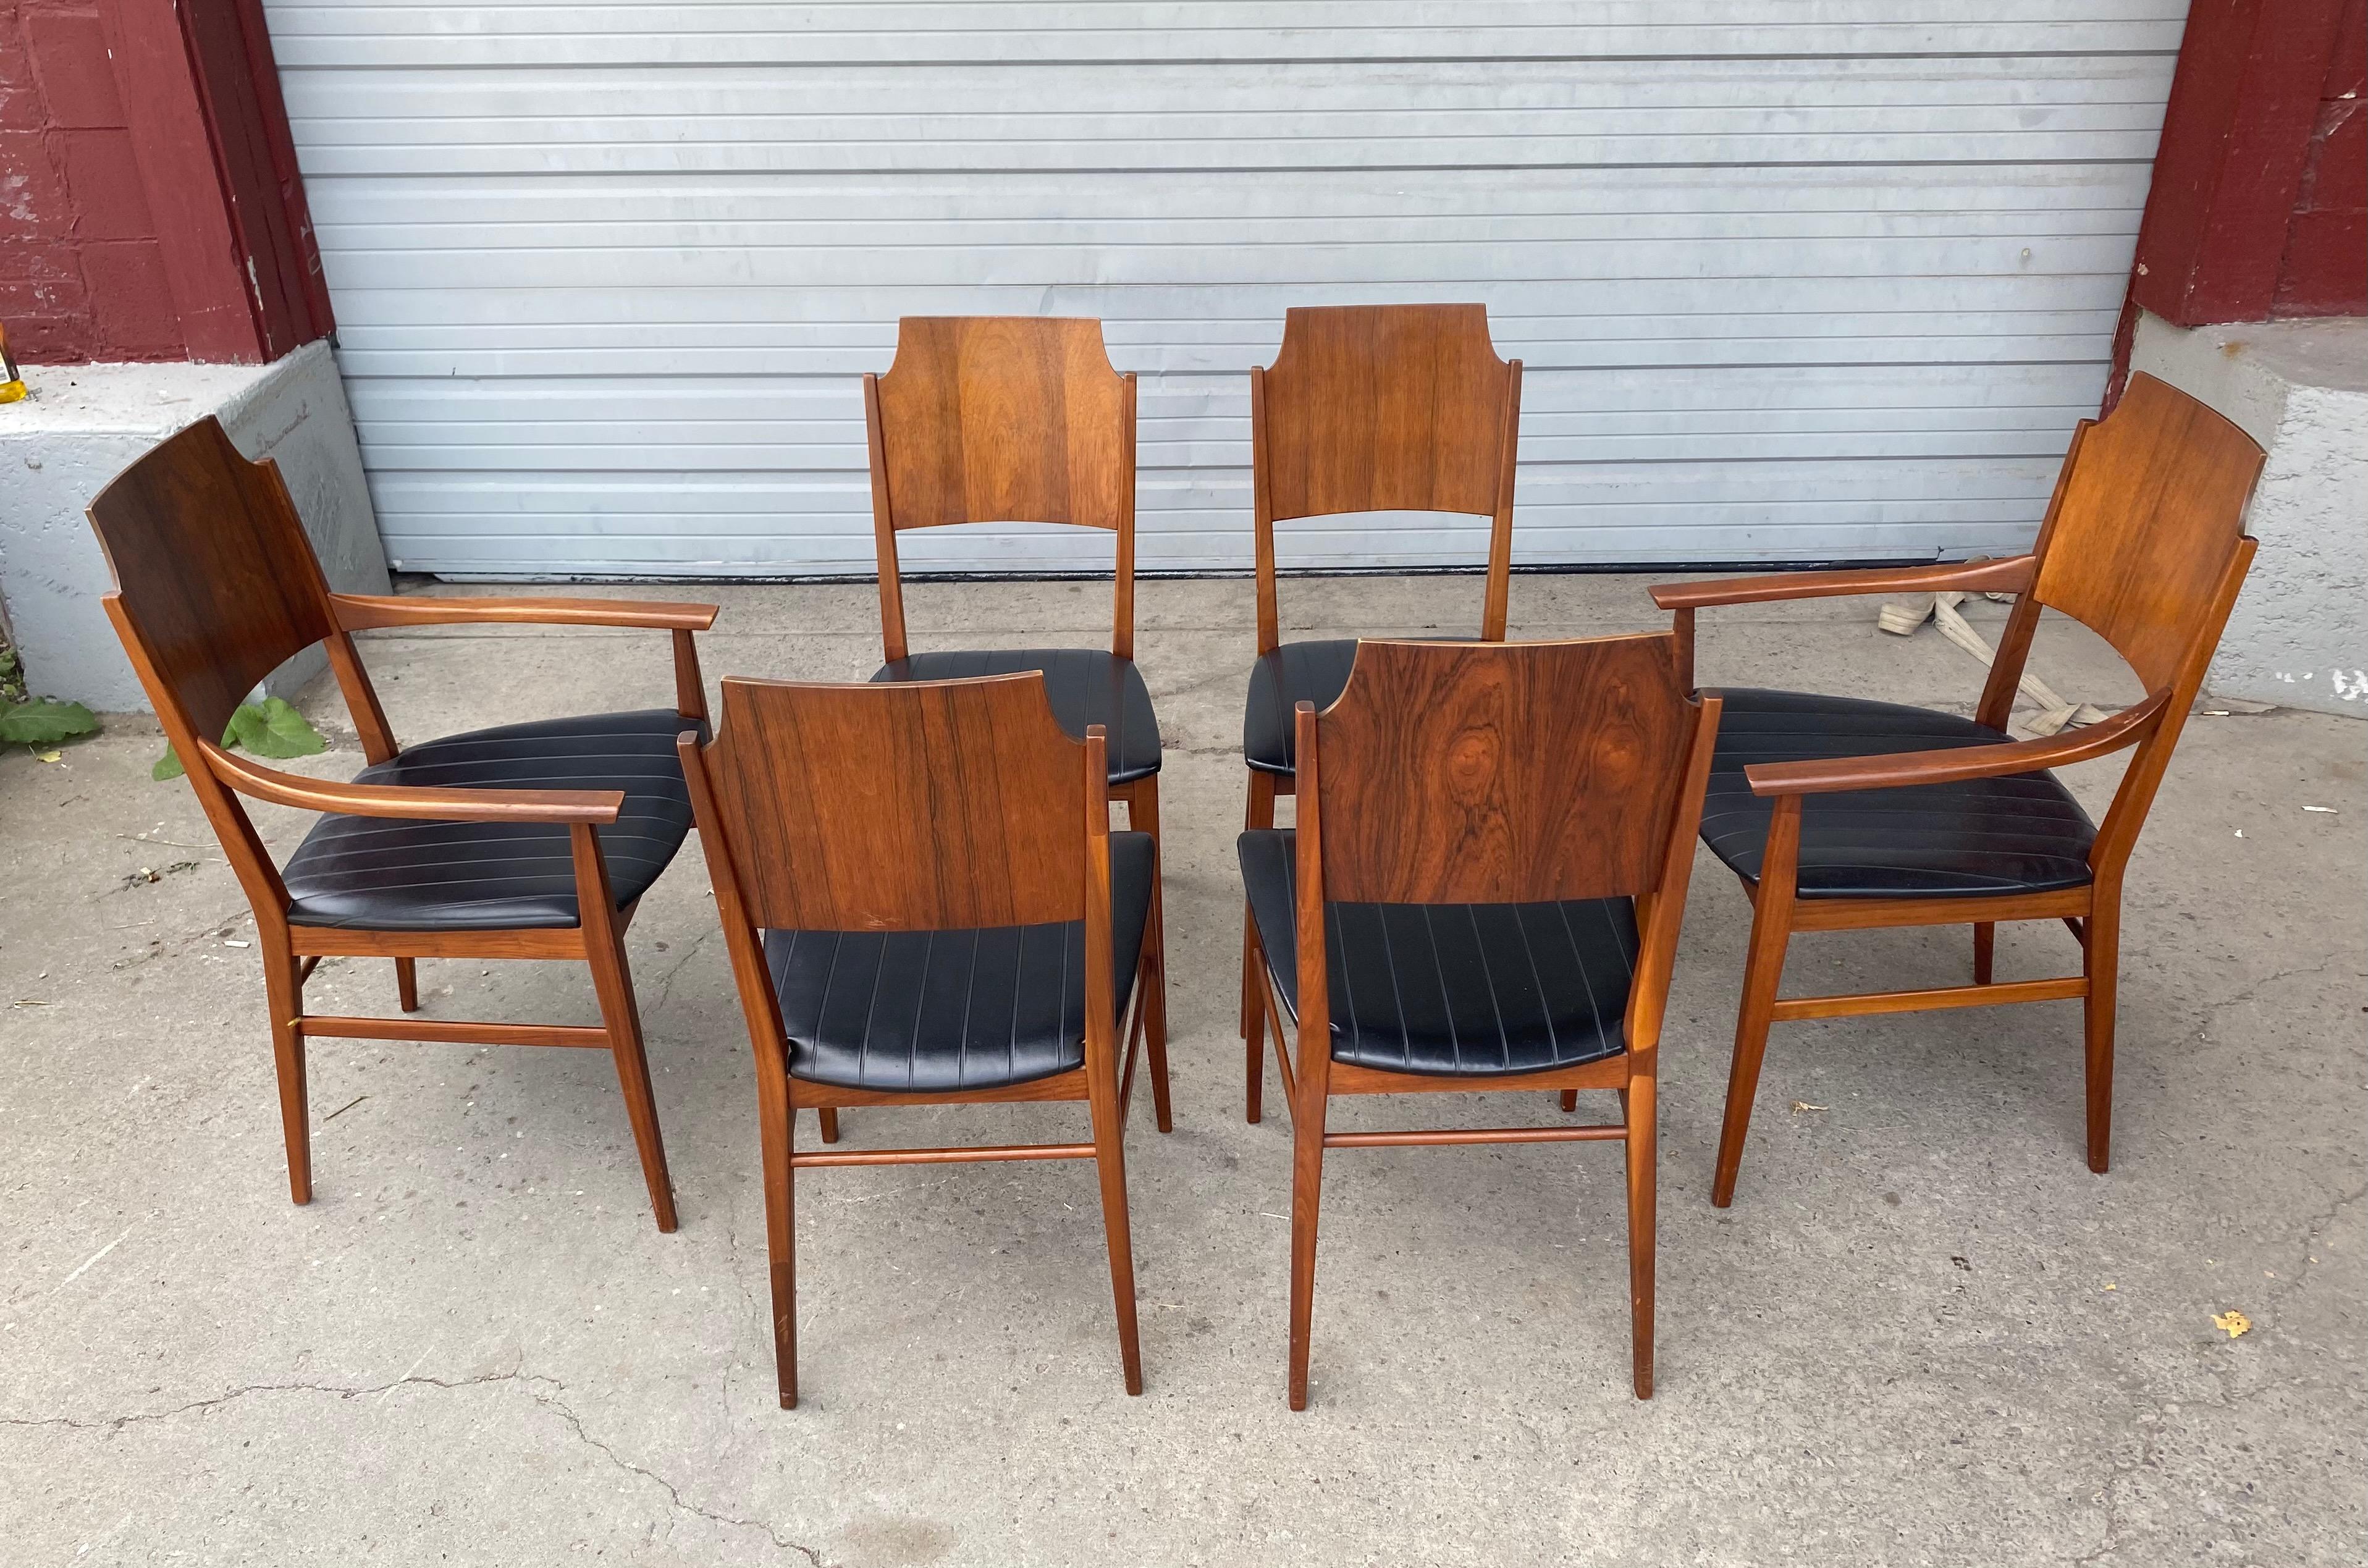 Mid-Century Modern rosewood dining chairs - Set of 6, designed by Paul McCobb for Lane, 